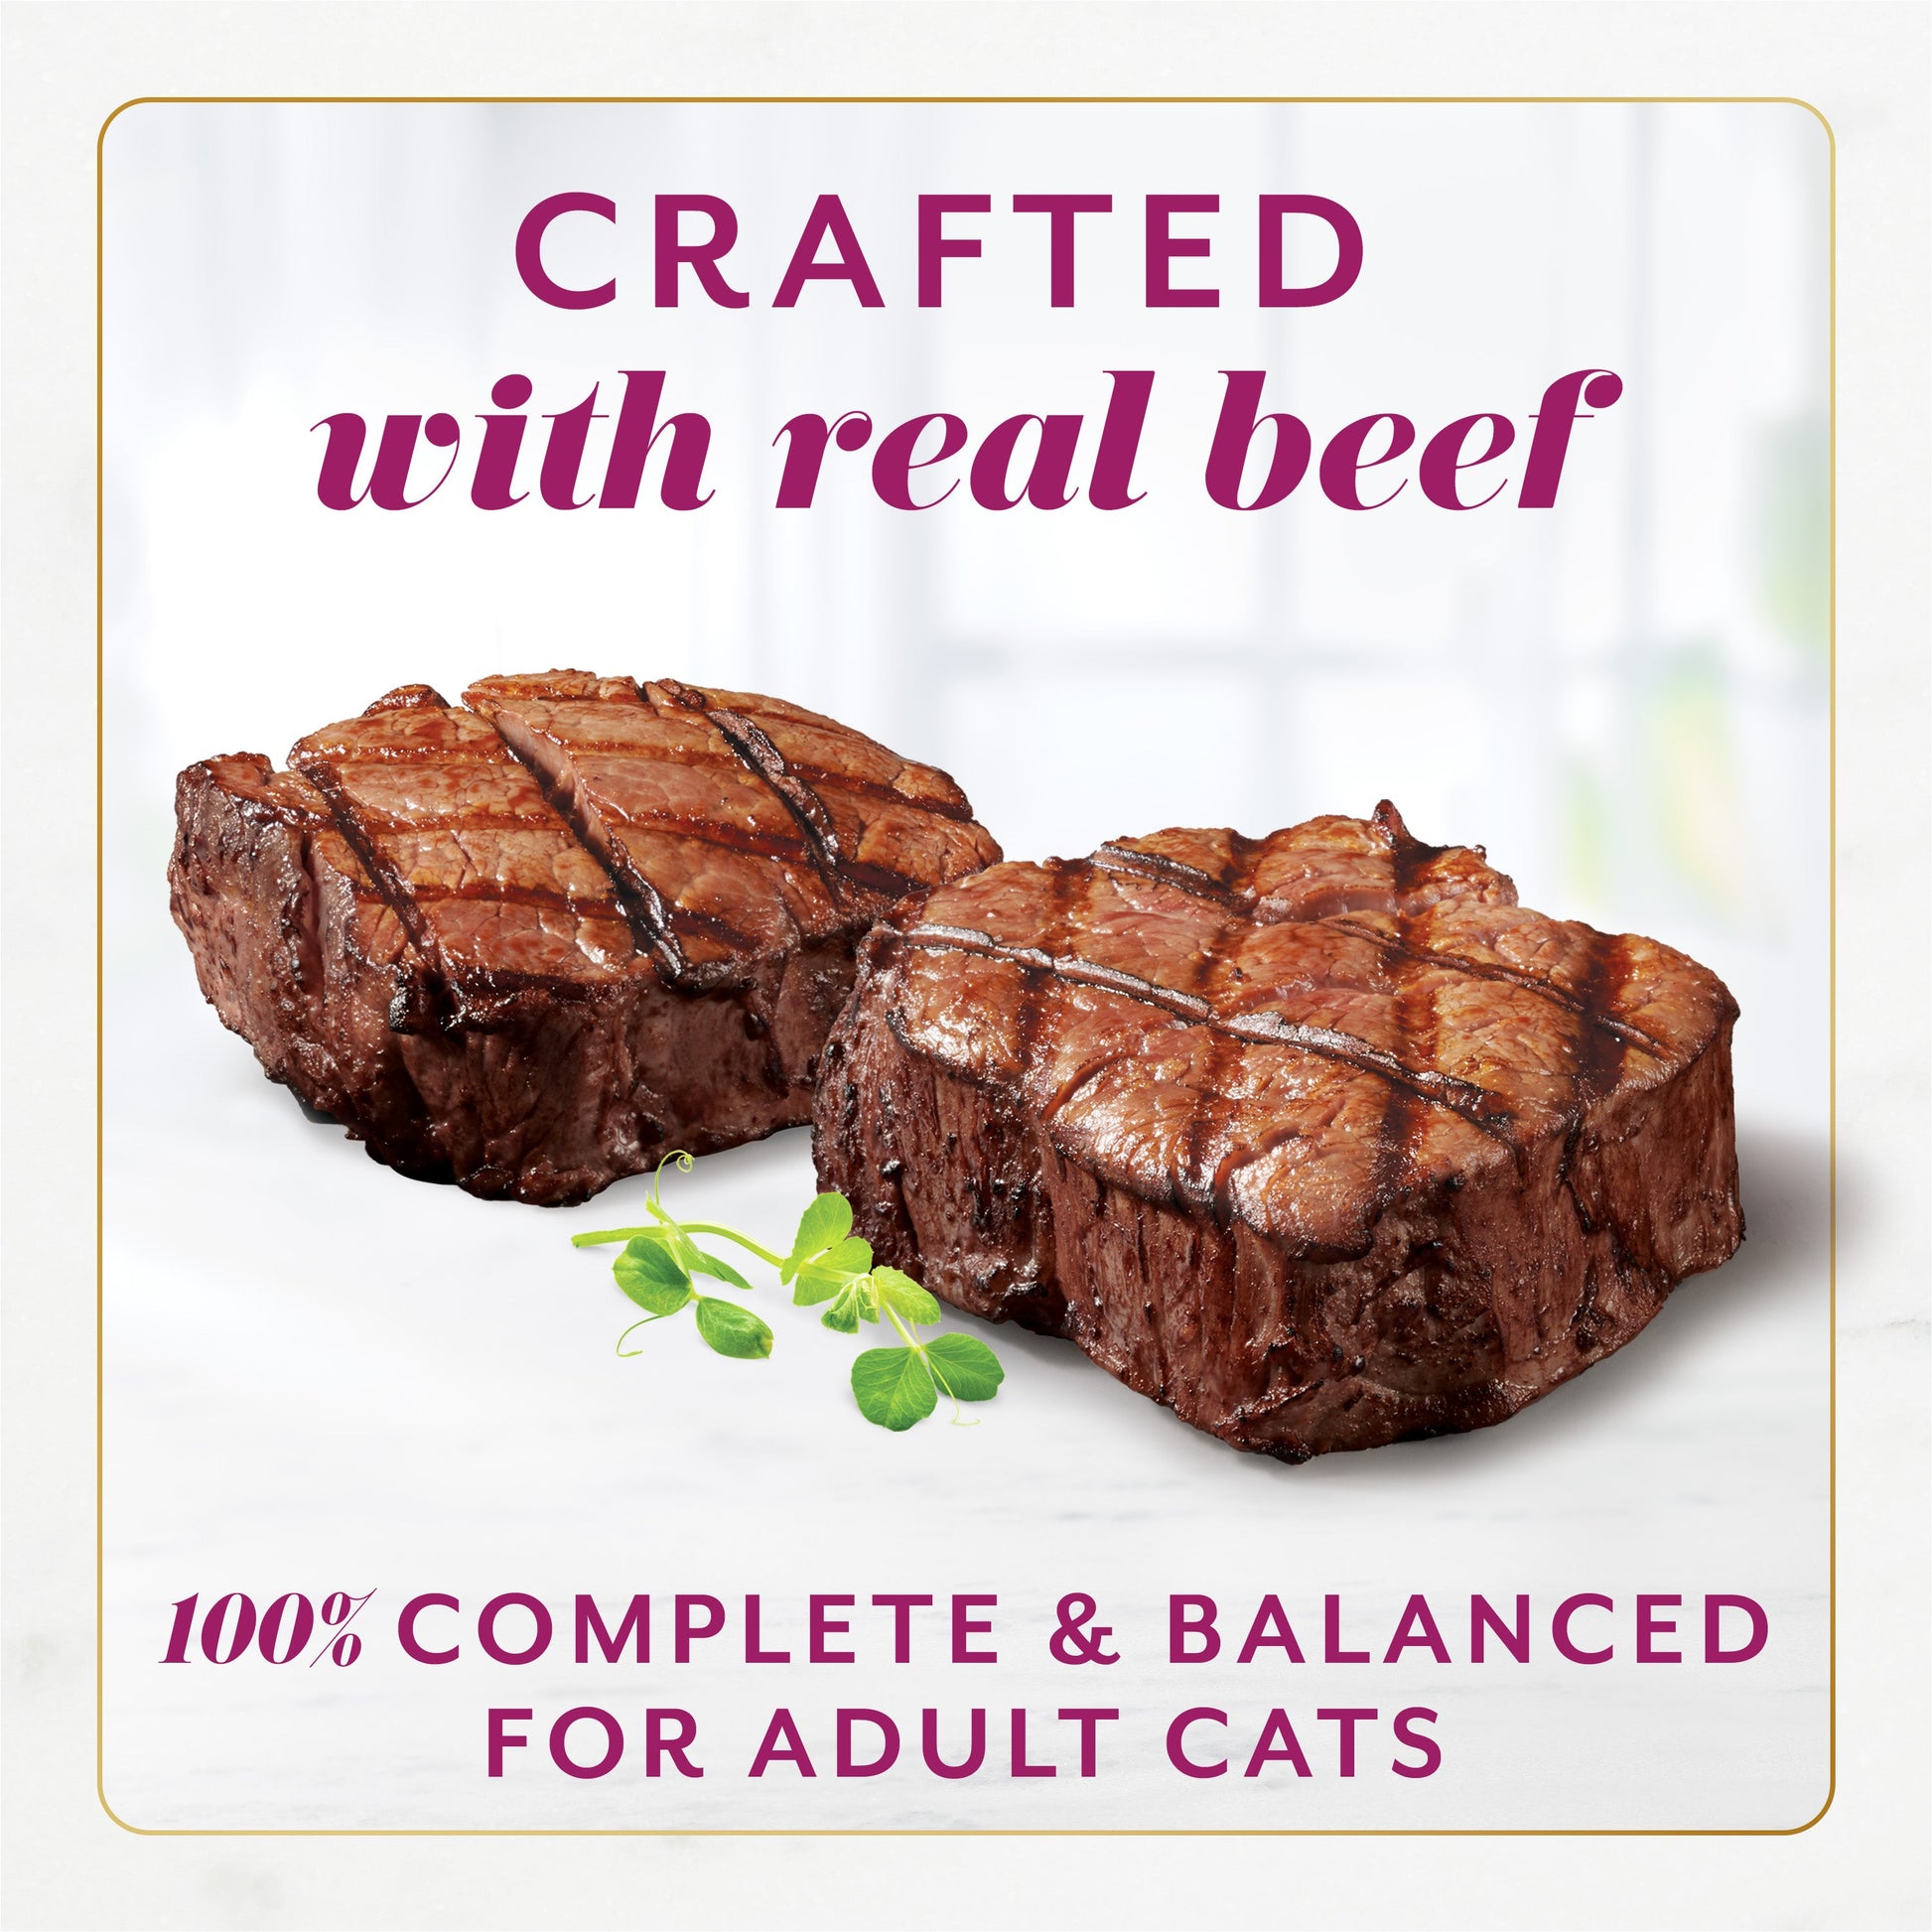 Crafted with real beef. 100% complete and balanced for adult cats